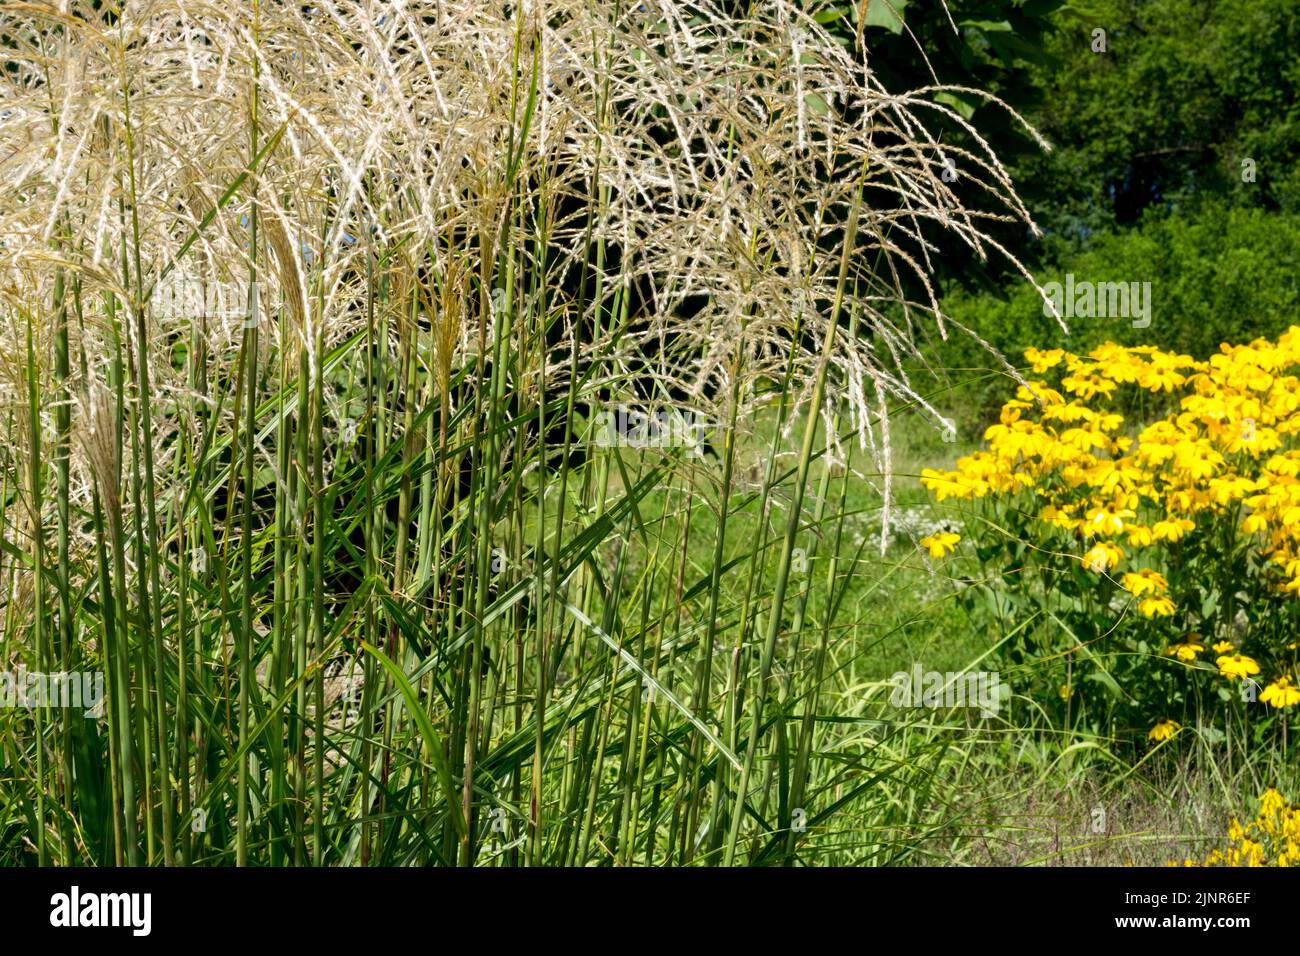 August, Miscanthus sinensis 'Flammenmeer', Herbaceous, Plant, Ornamental grass, Blooming Stock Photo